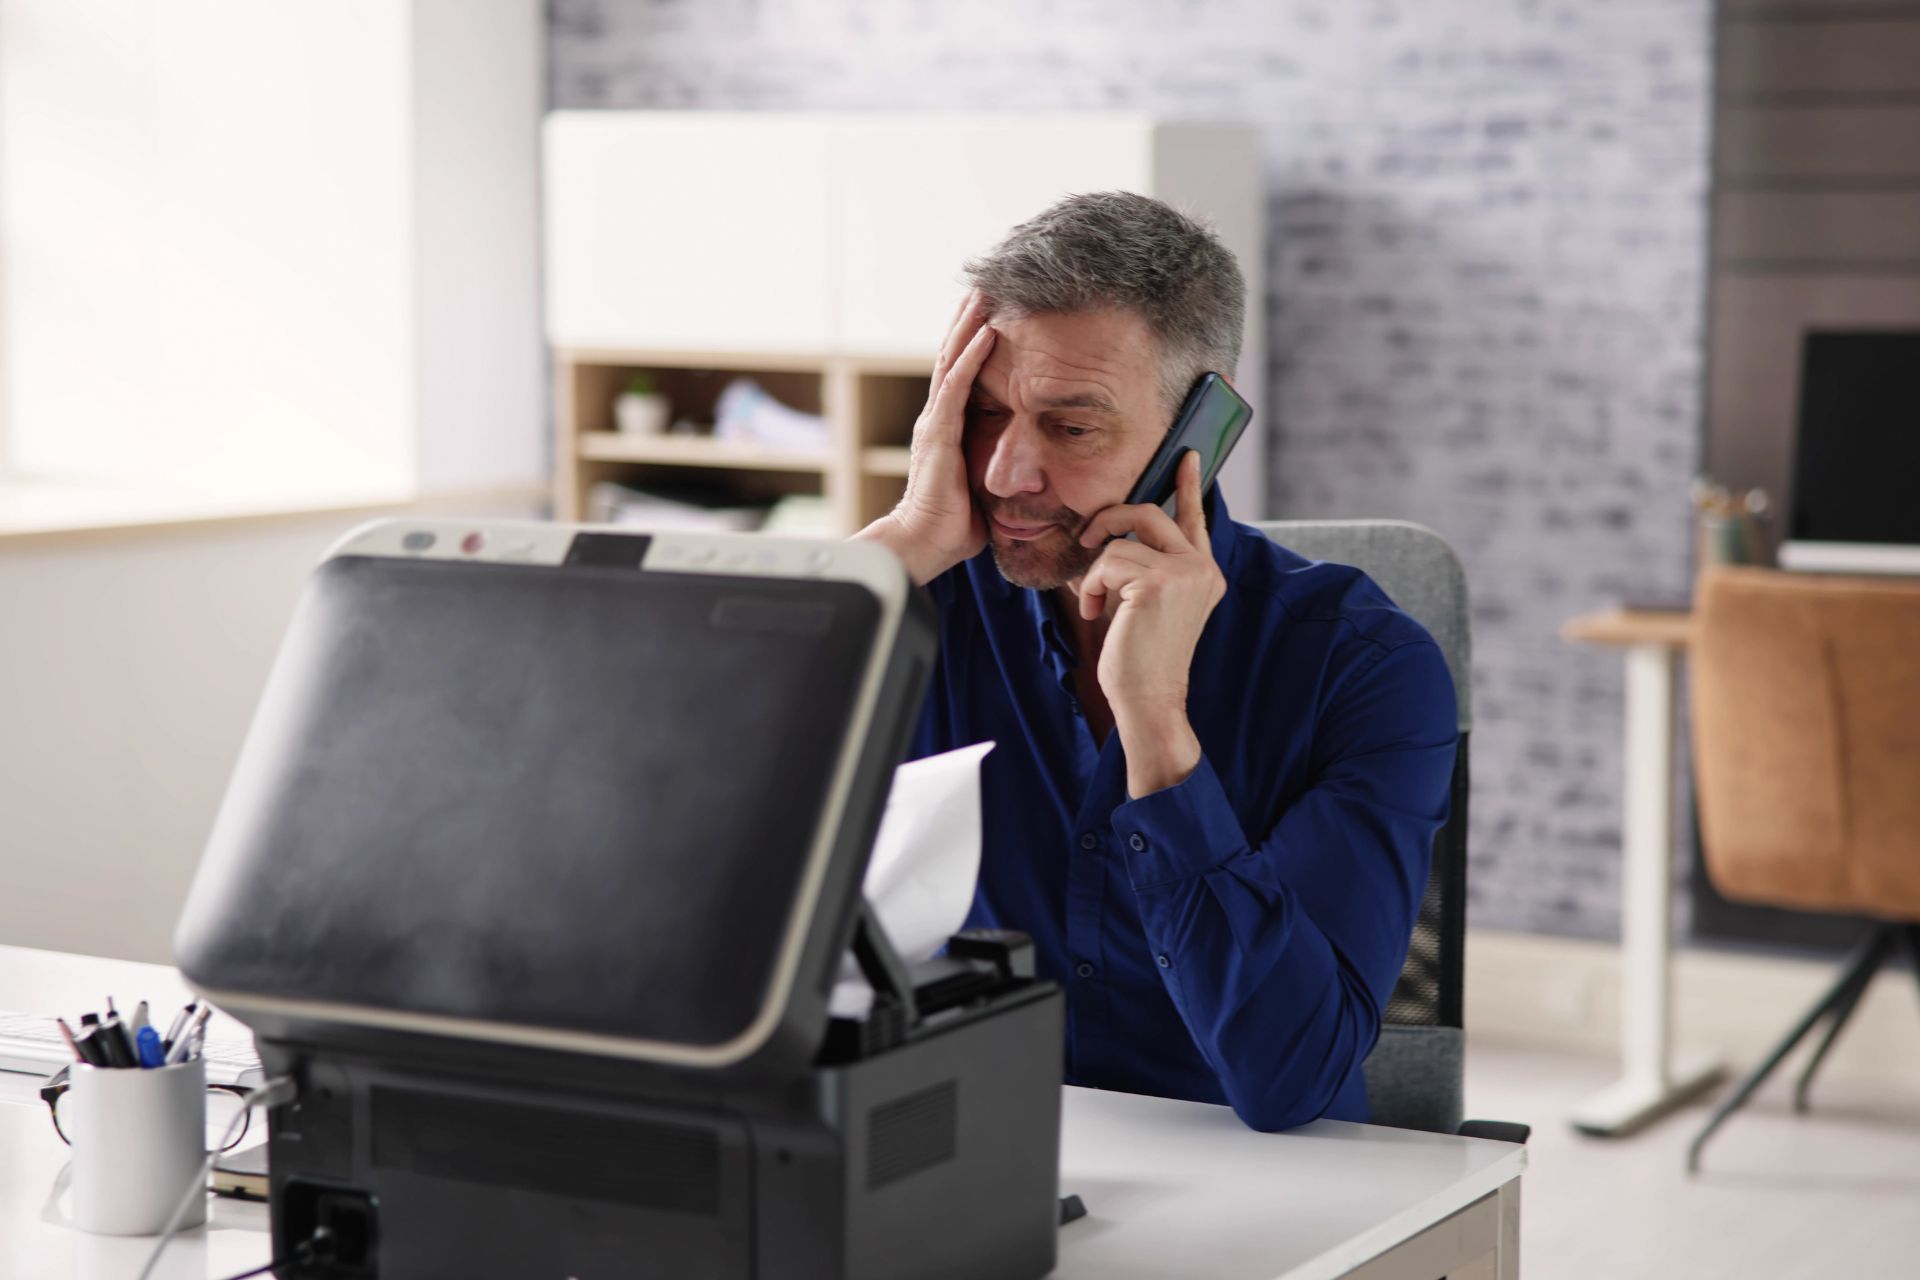 A frustrated man on the phone dealing with a broken printer